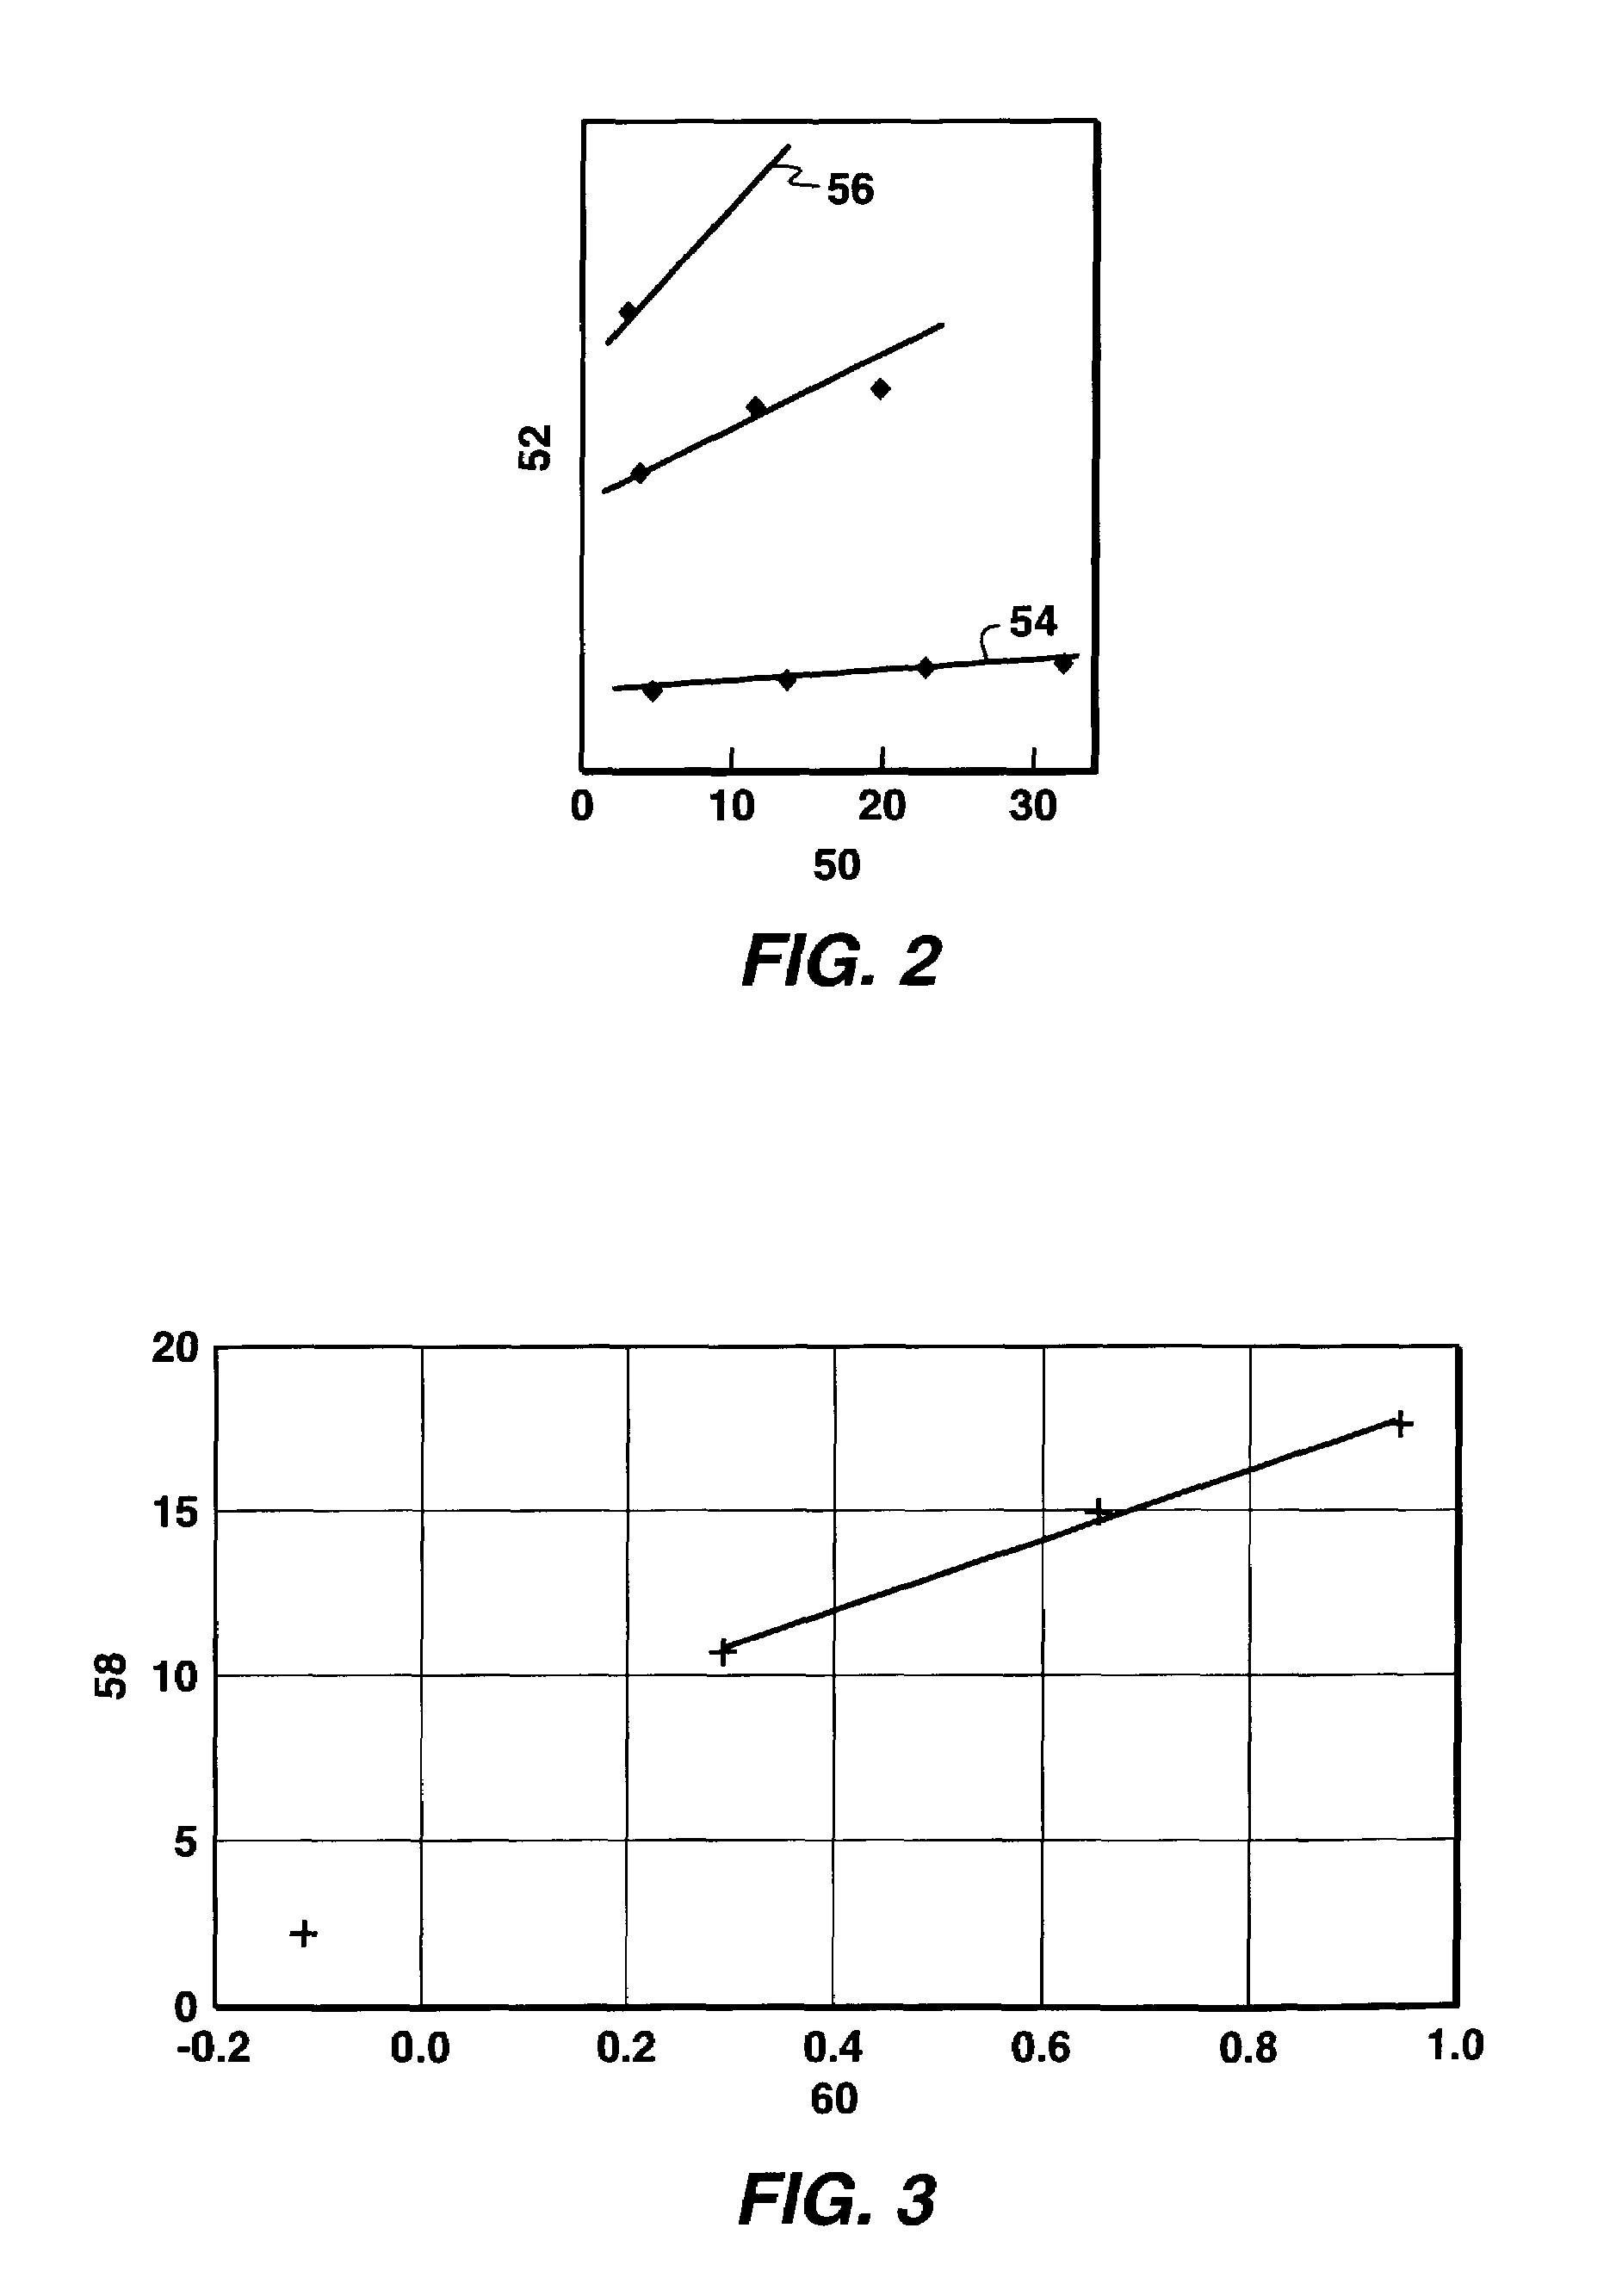 Method for borehole measurement of formation properties